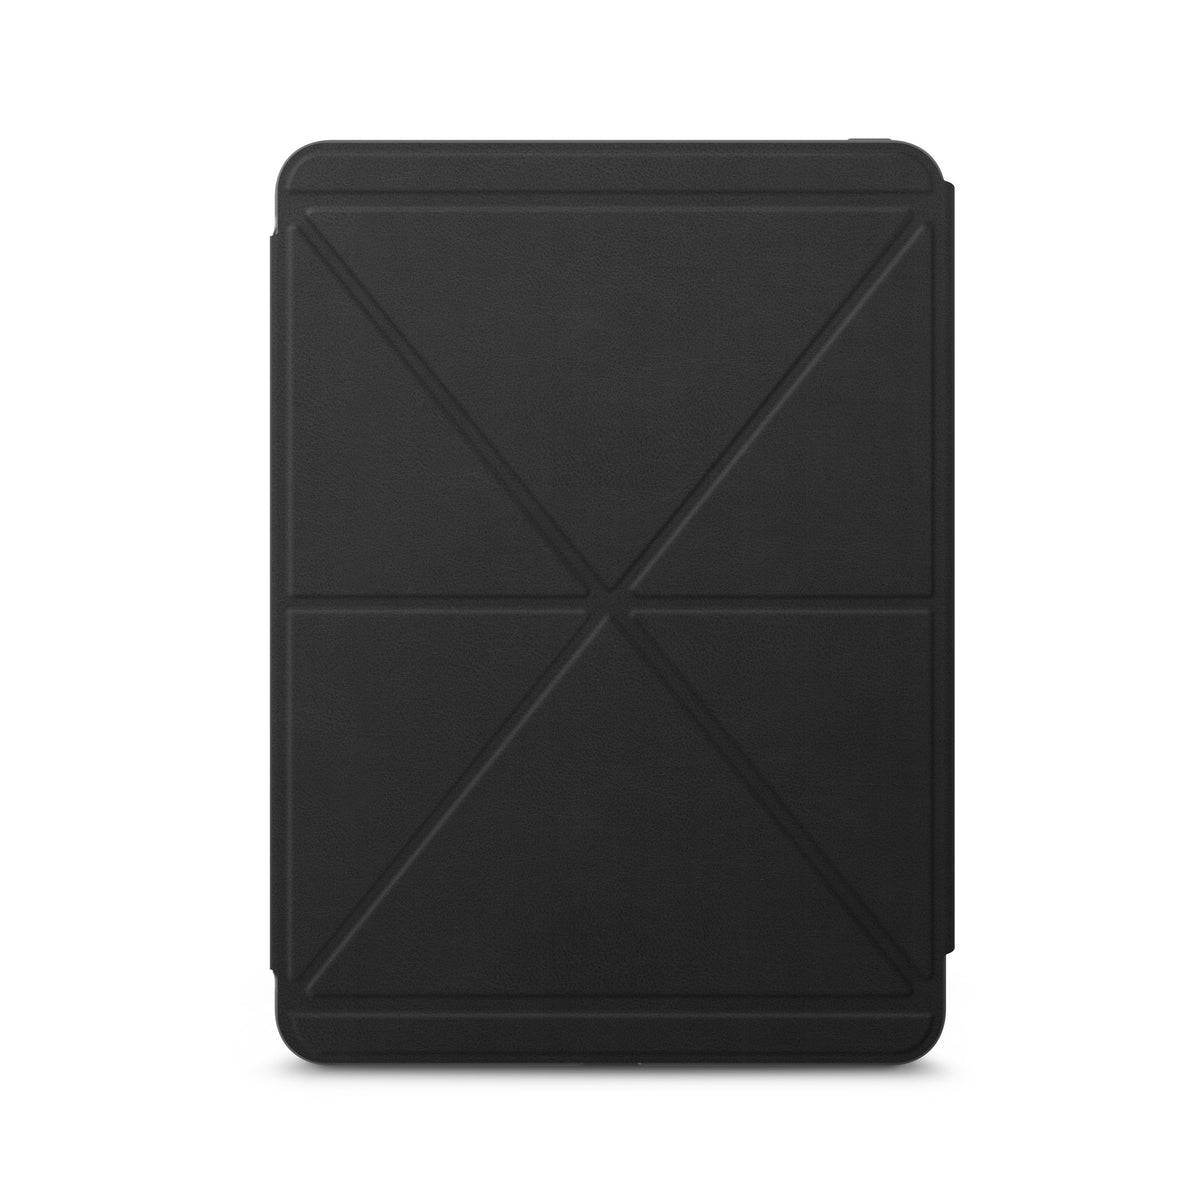 [OPEN BOX] MOSHI VersaCover for iPad Pro 11-inch (1st/2nd Gen) - Charcoal Black